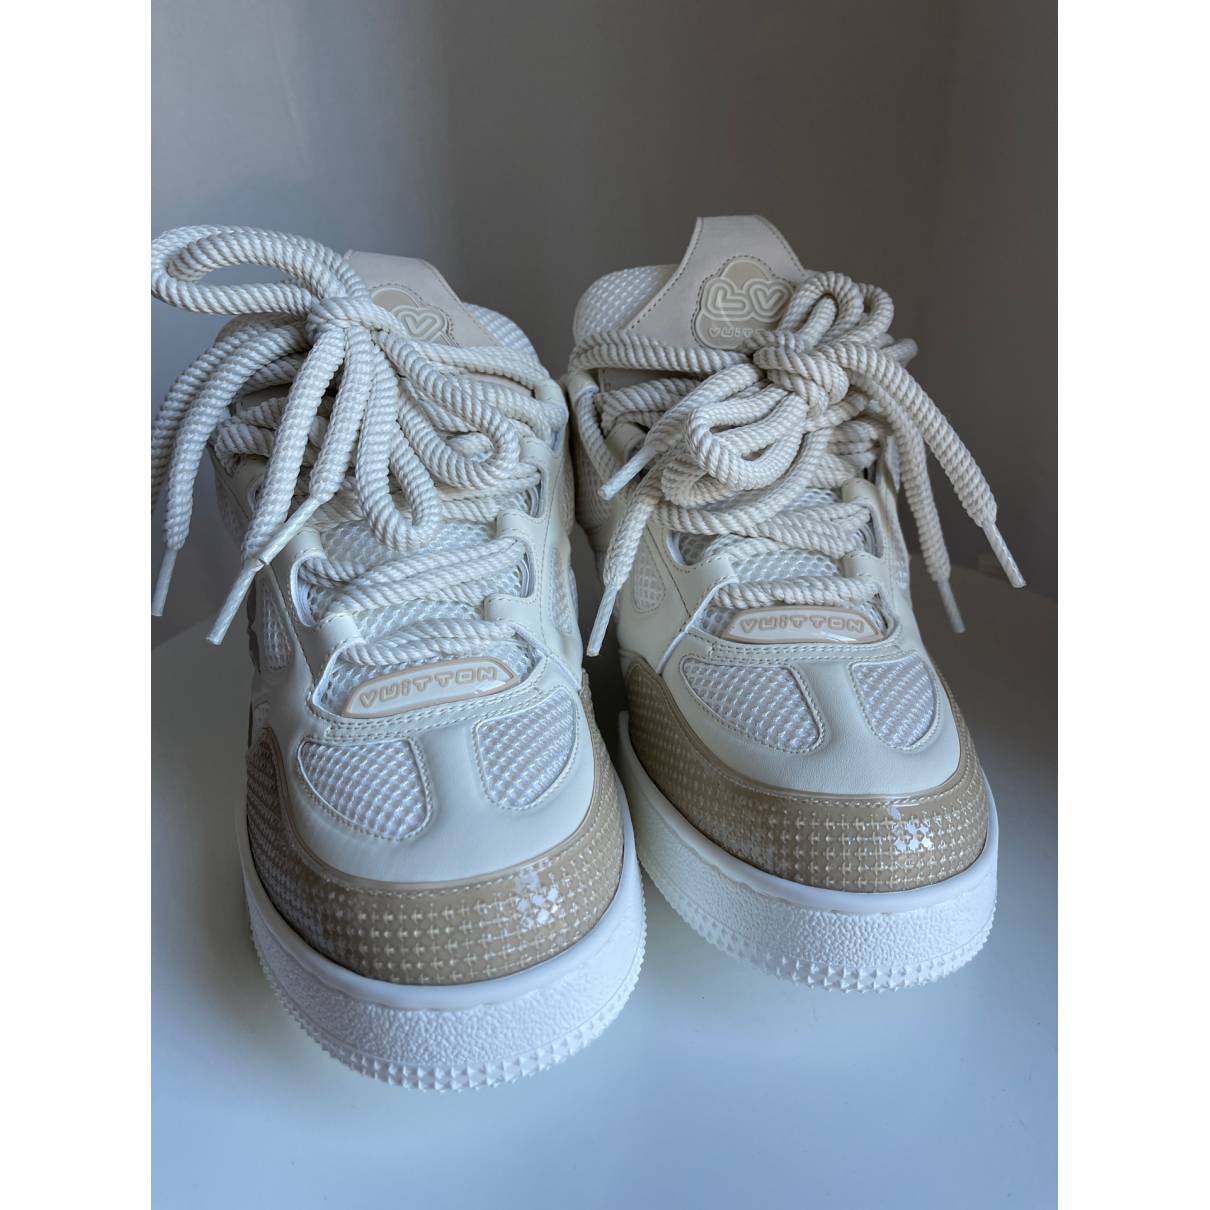 Lv trainer low trainers Louis Vuitton Beige size 8 UK in Other - 25349007